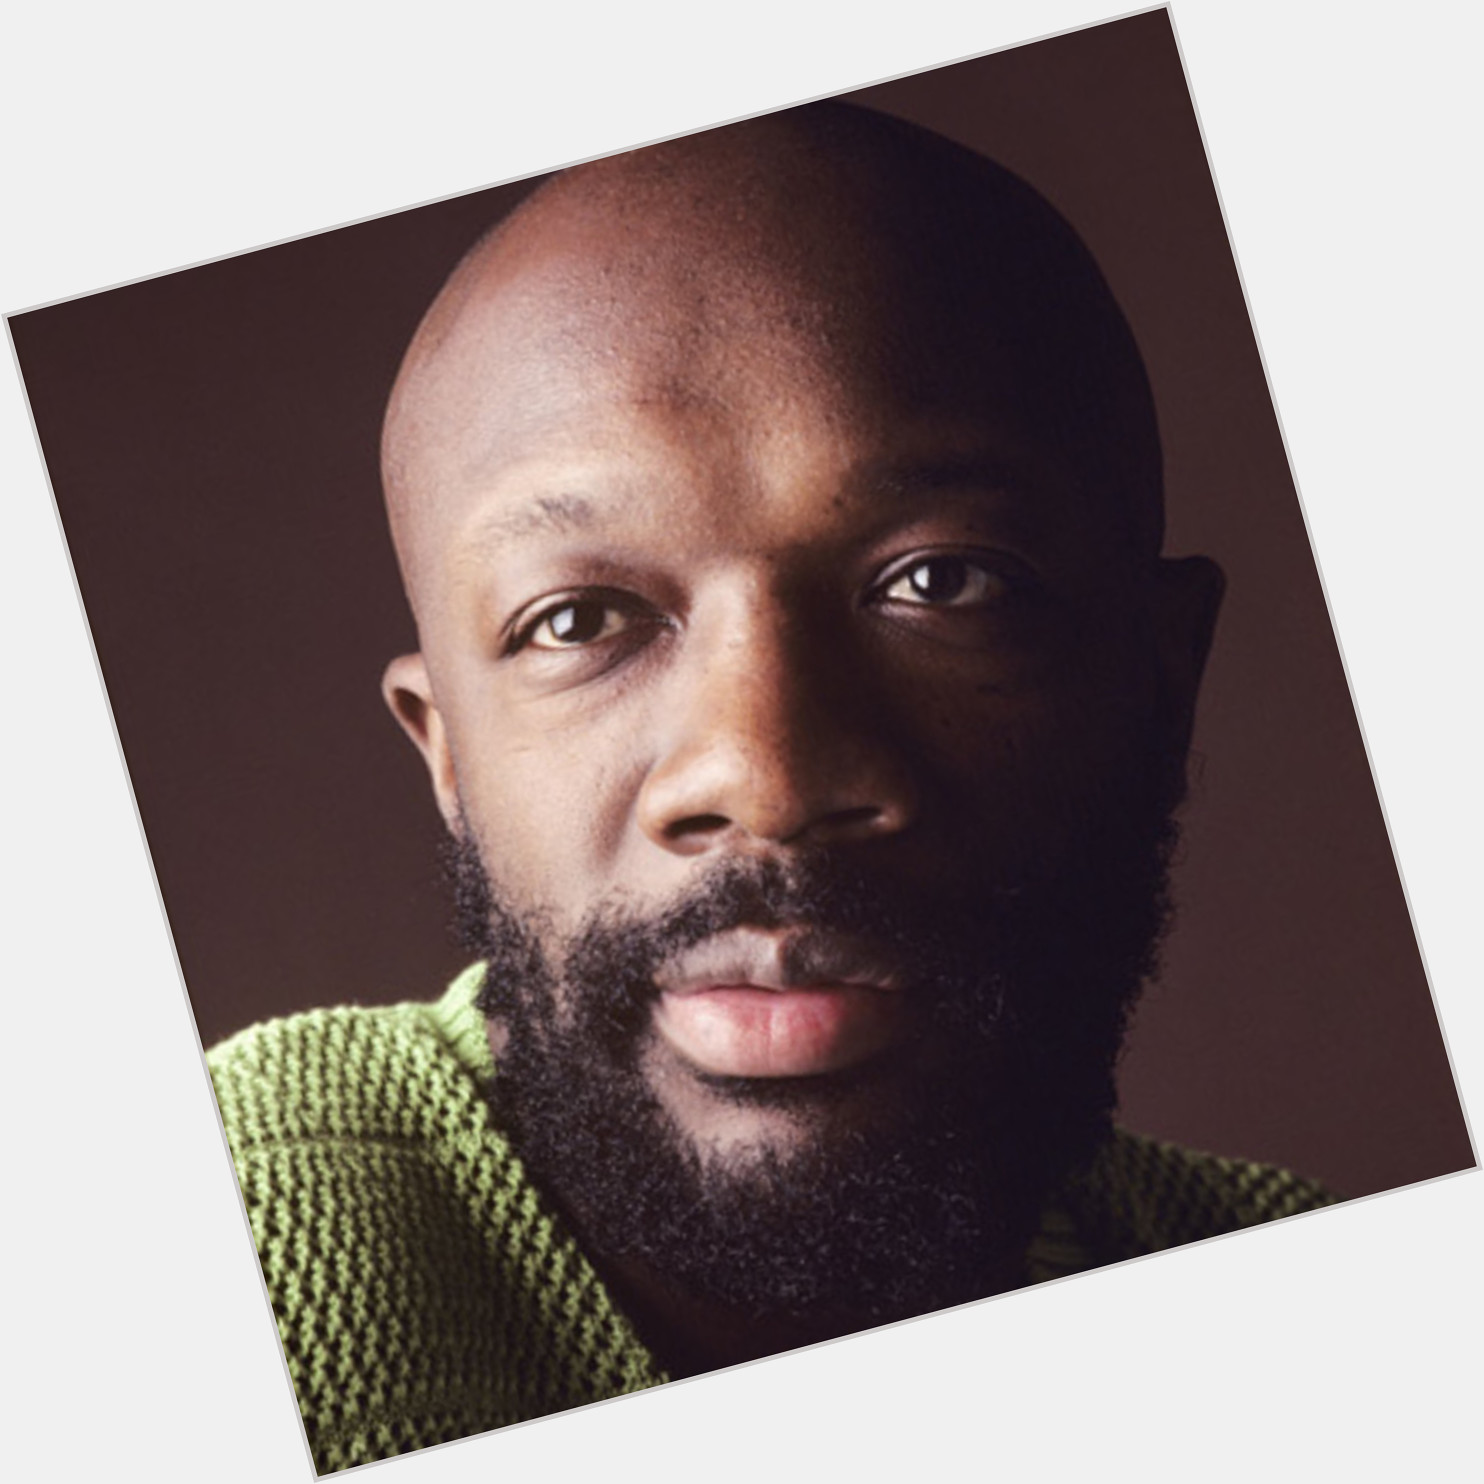 Happy Birthday to Isaac Hayes born 8/20/1942 - died 8/10/2008  